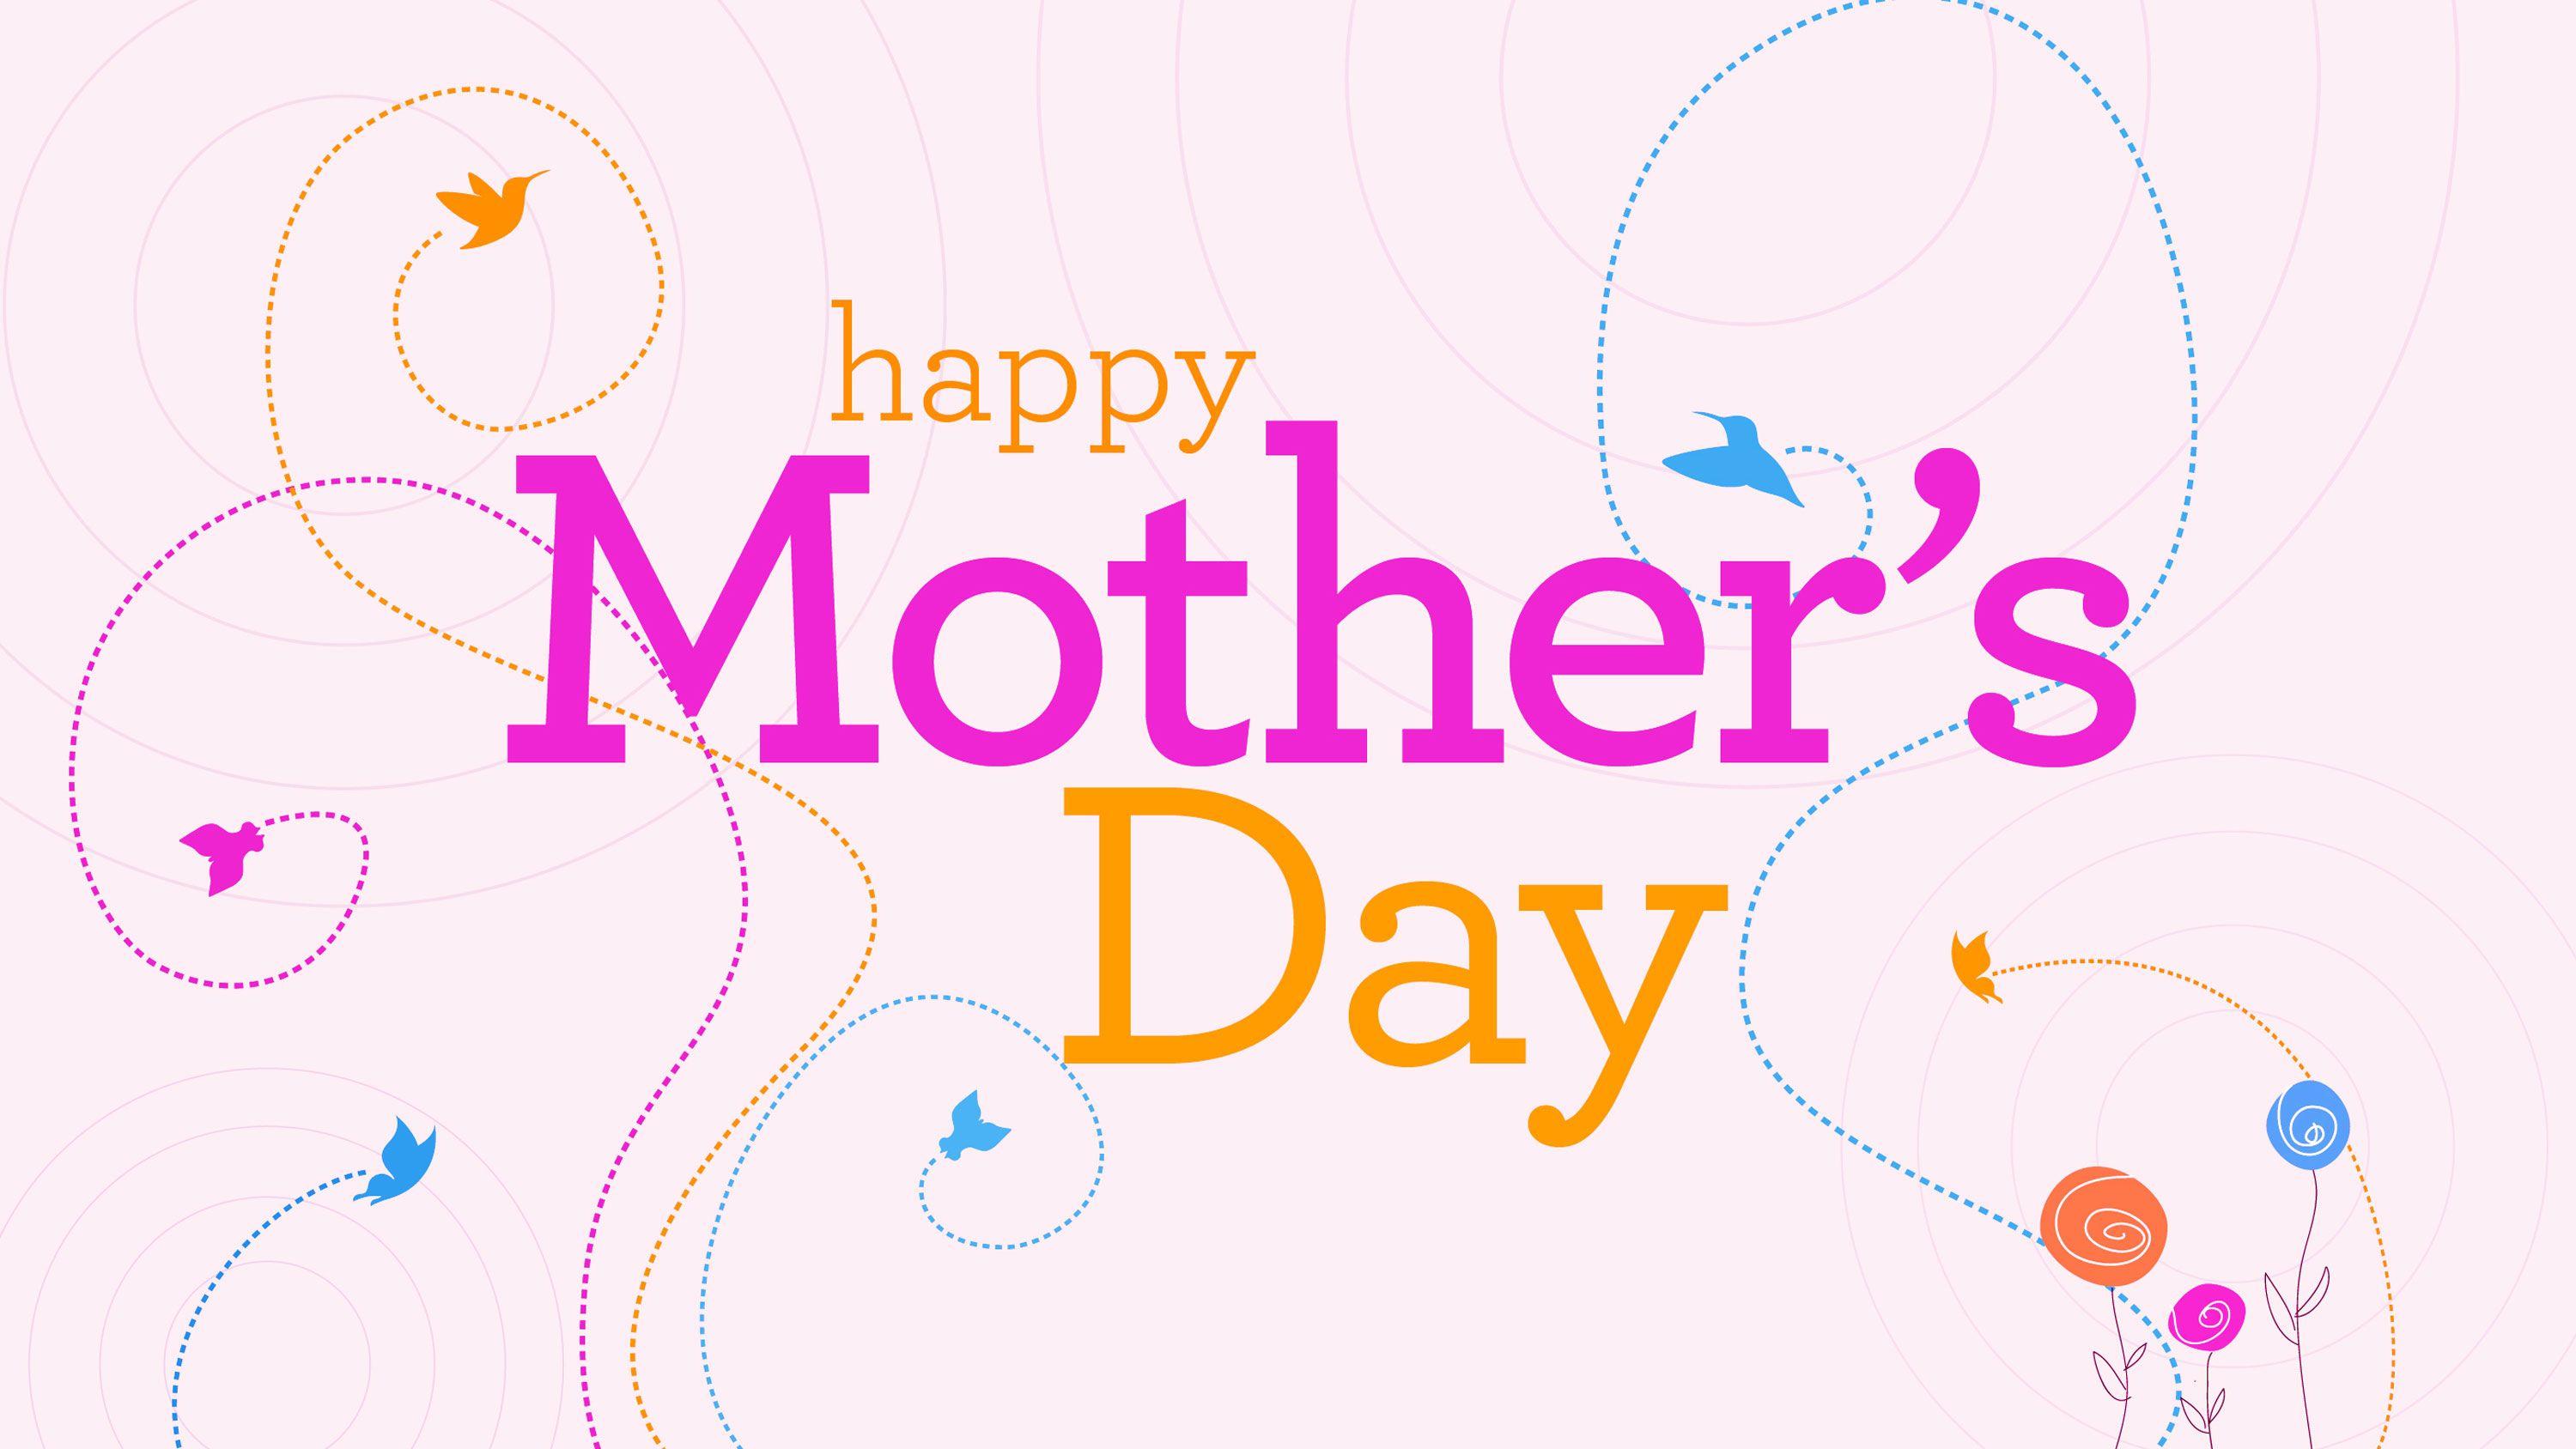 Happy Mothers Day HD Image and Wallpaper Download Free